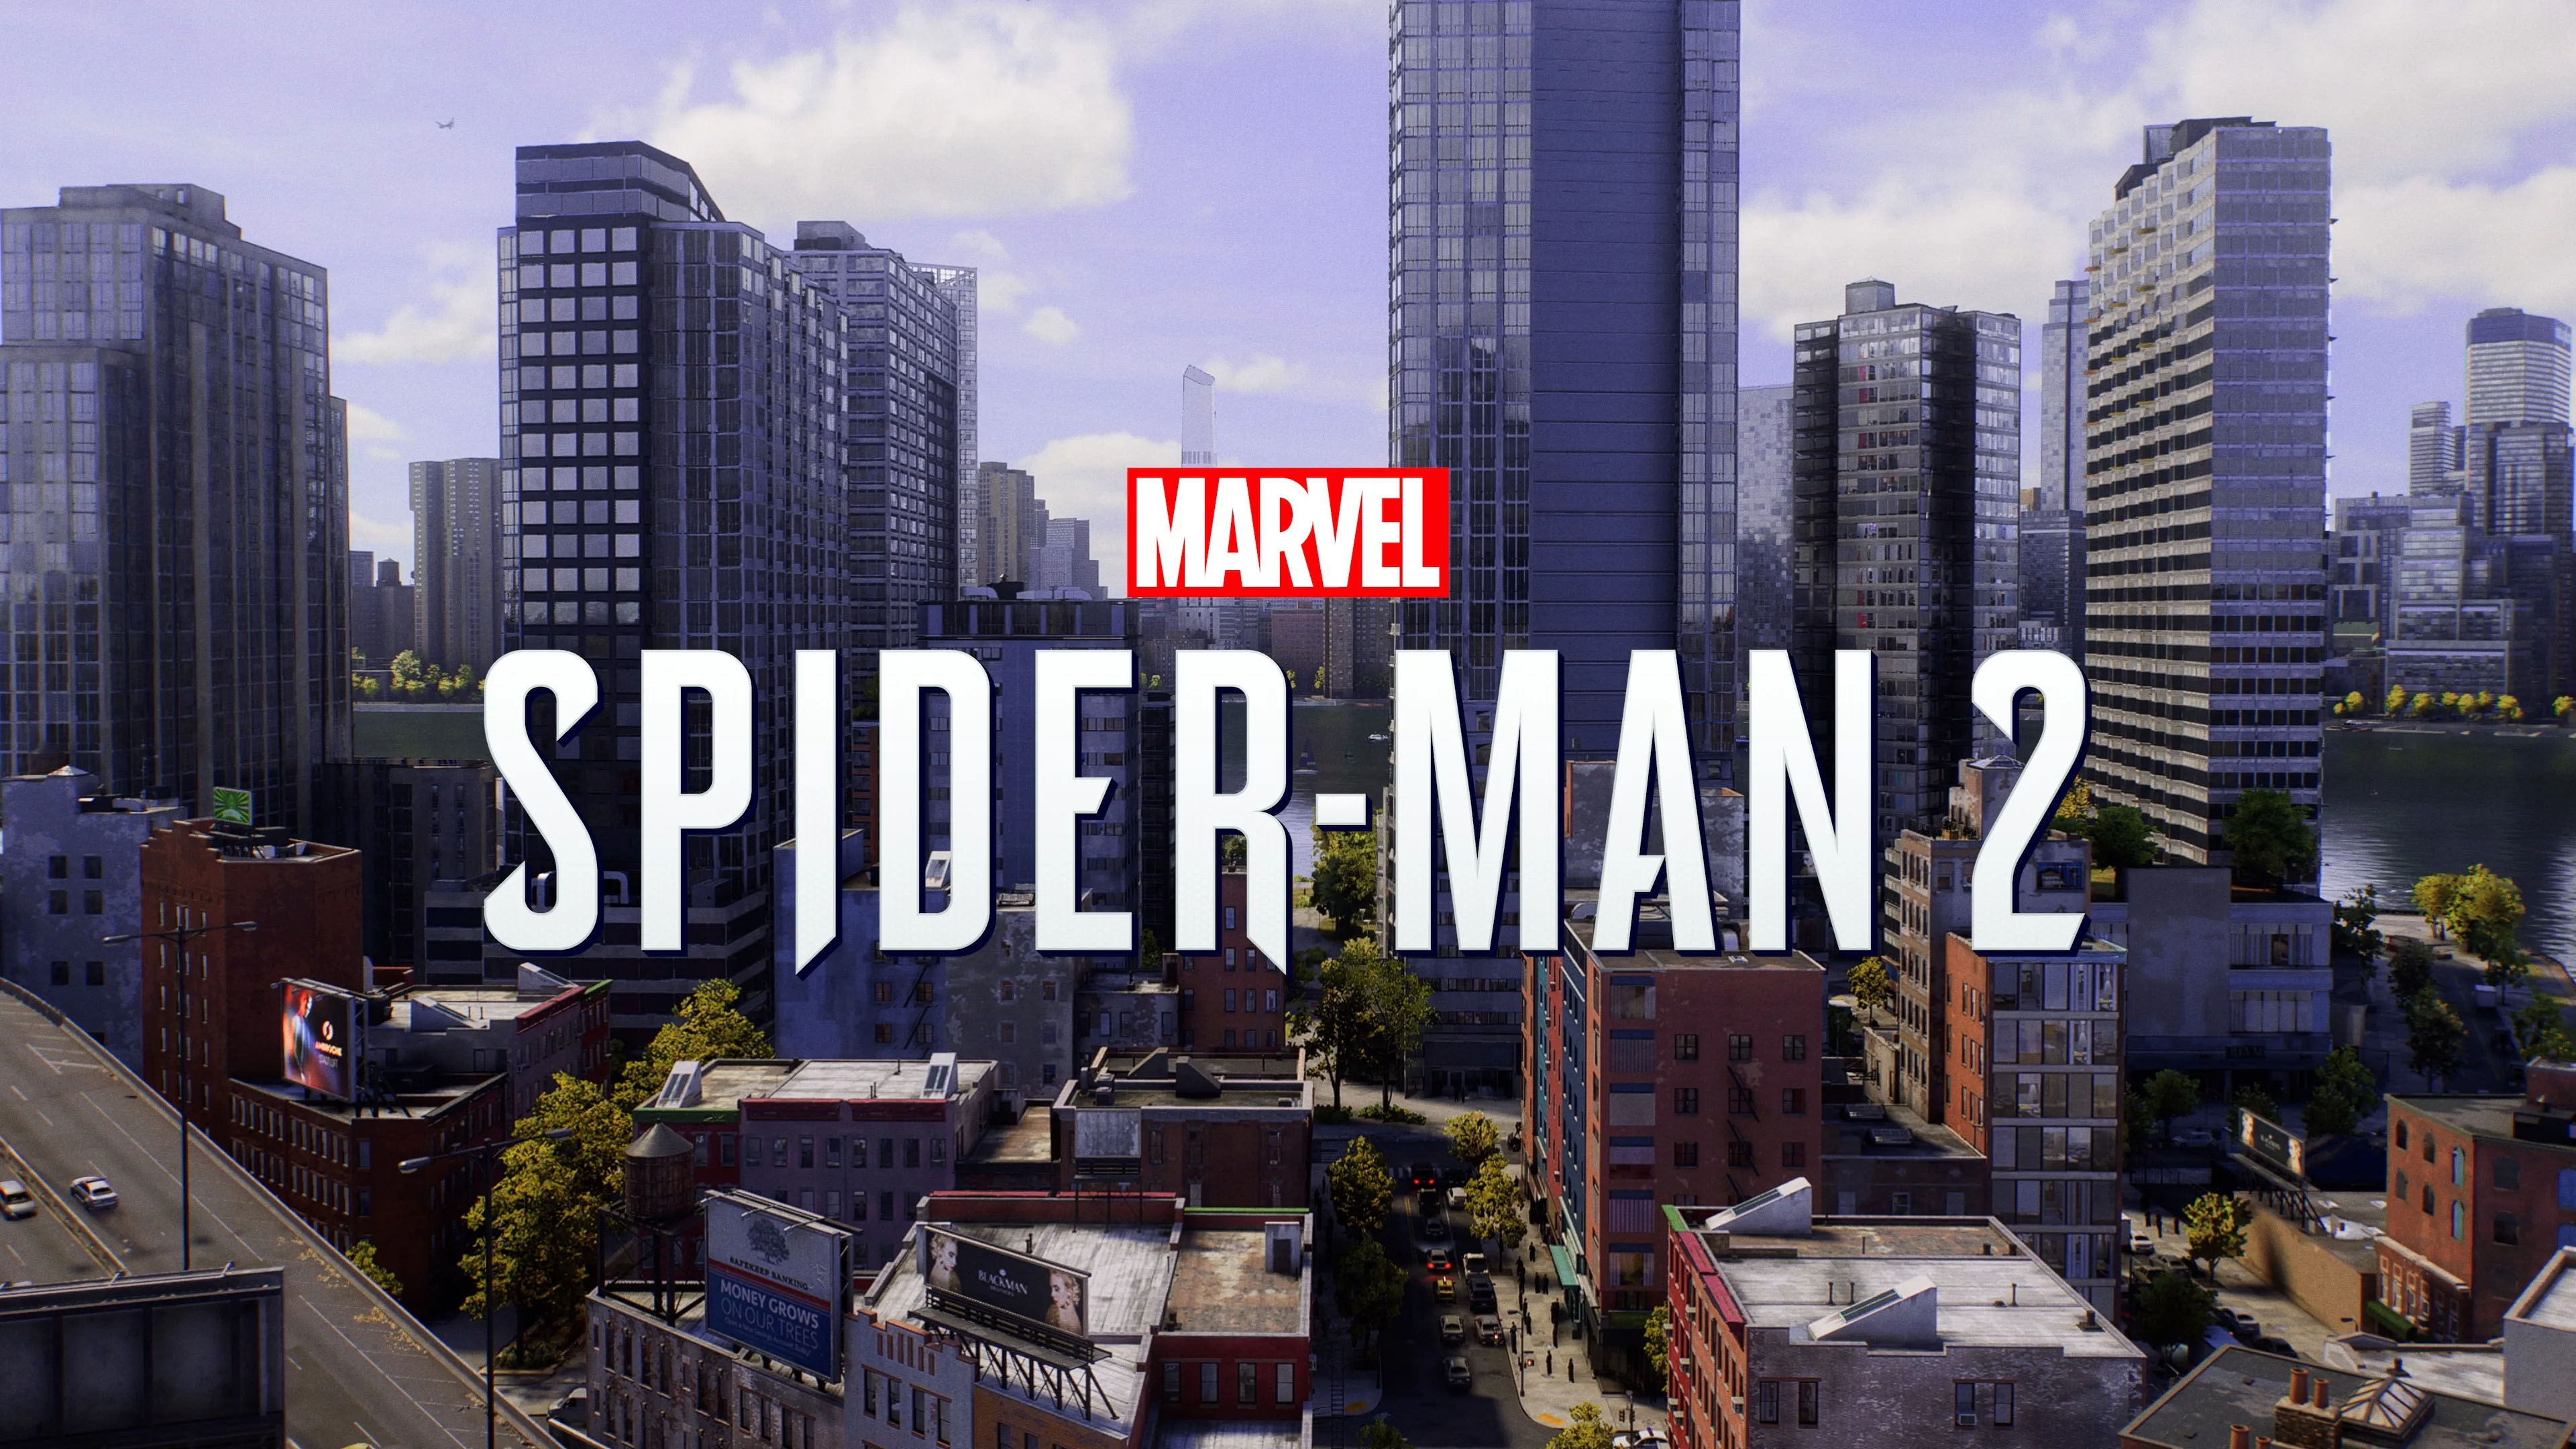 Preview the Marvel's Spider-Man 2 Soundtrack in the Digital Deluxe